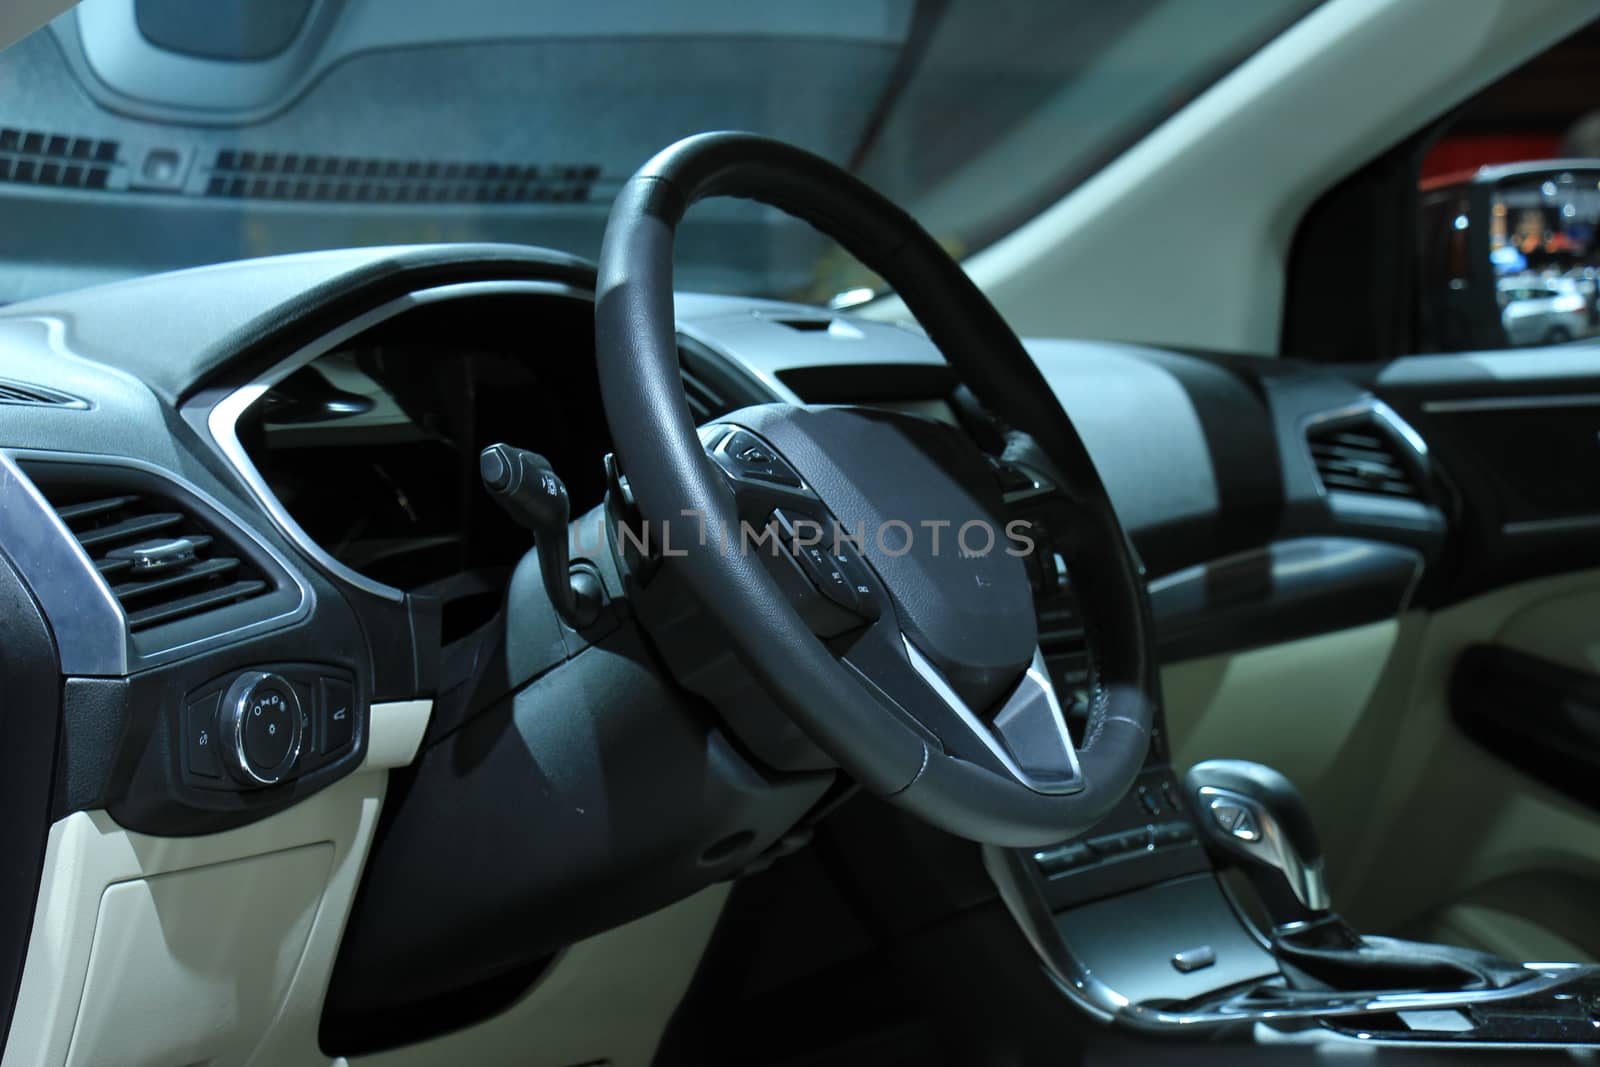 Modern car interior, luxurious materials in different shades of grey